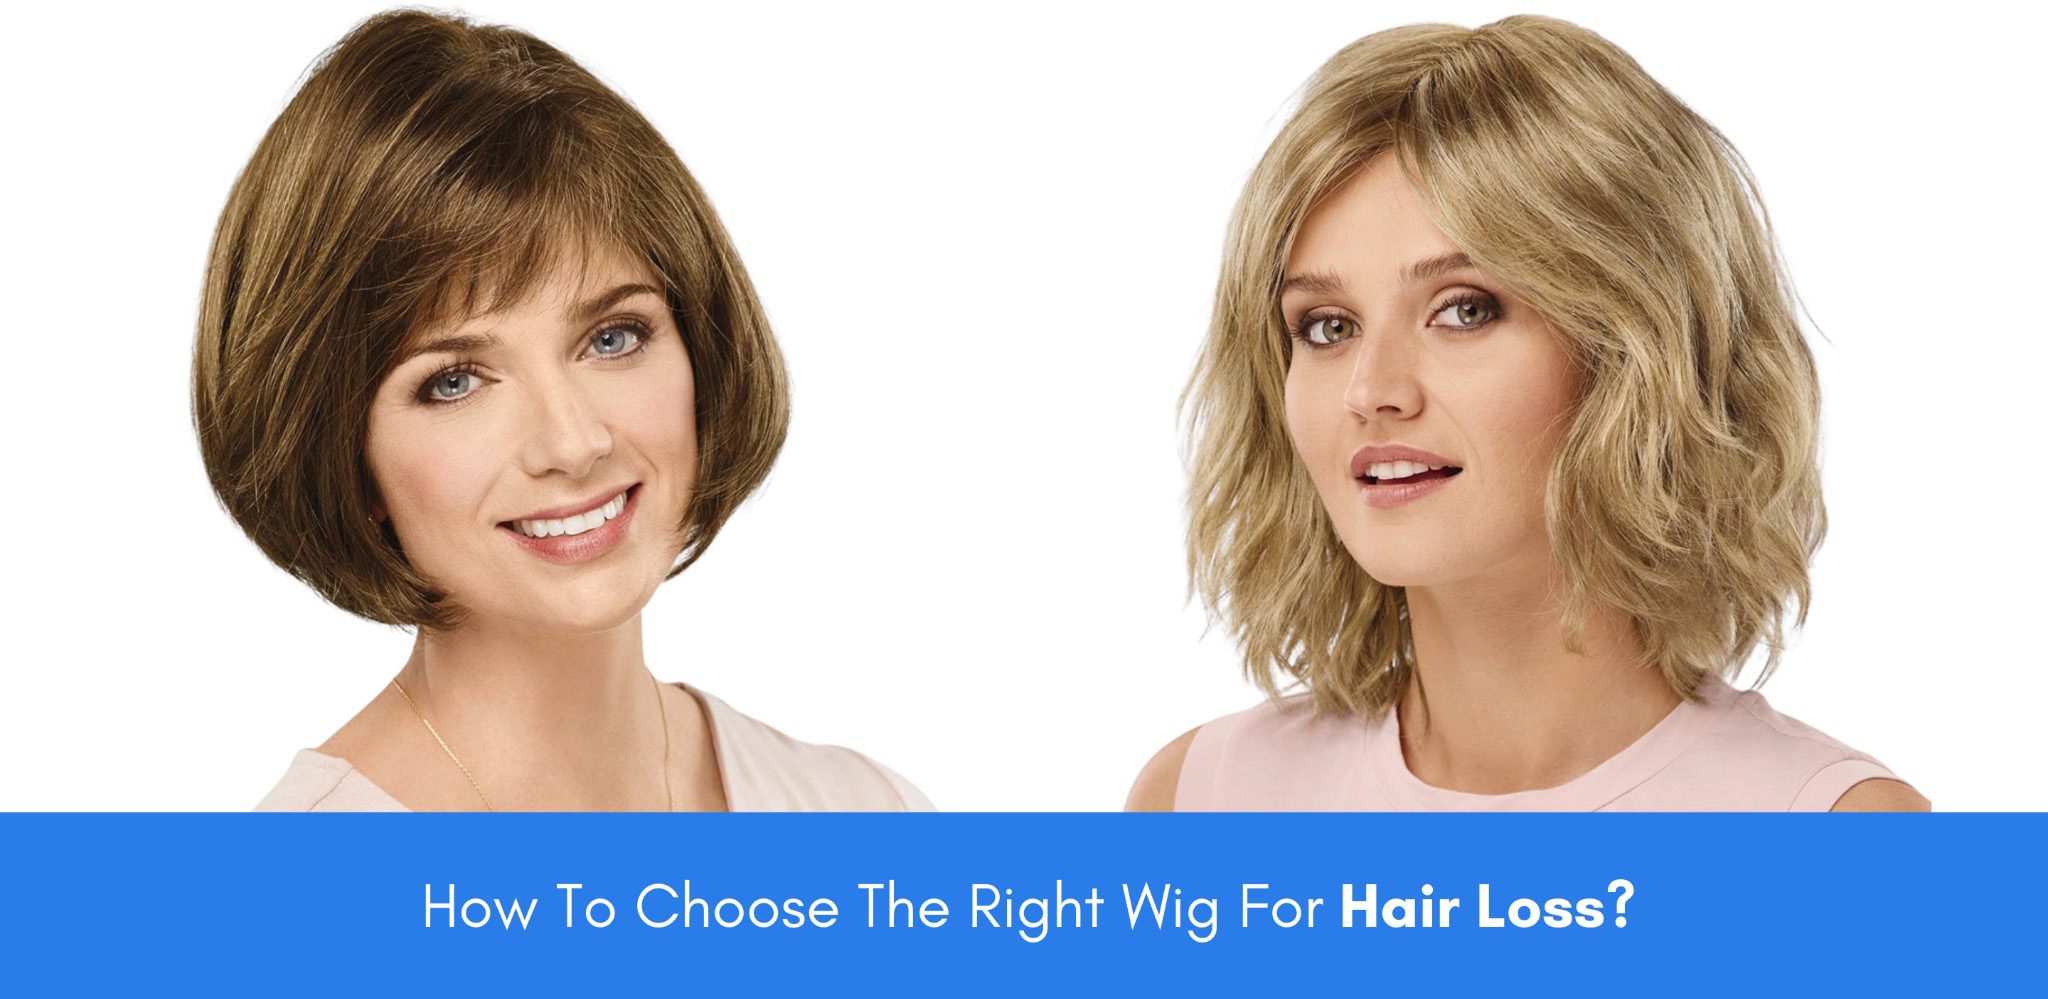 How To Choose The Right Wig For Hair Loss?